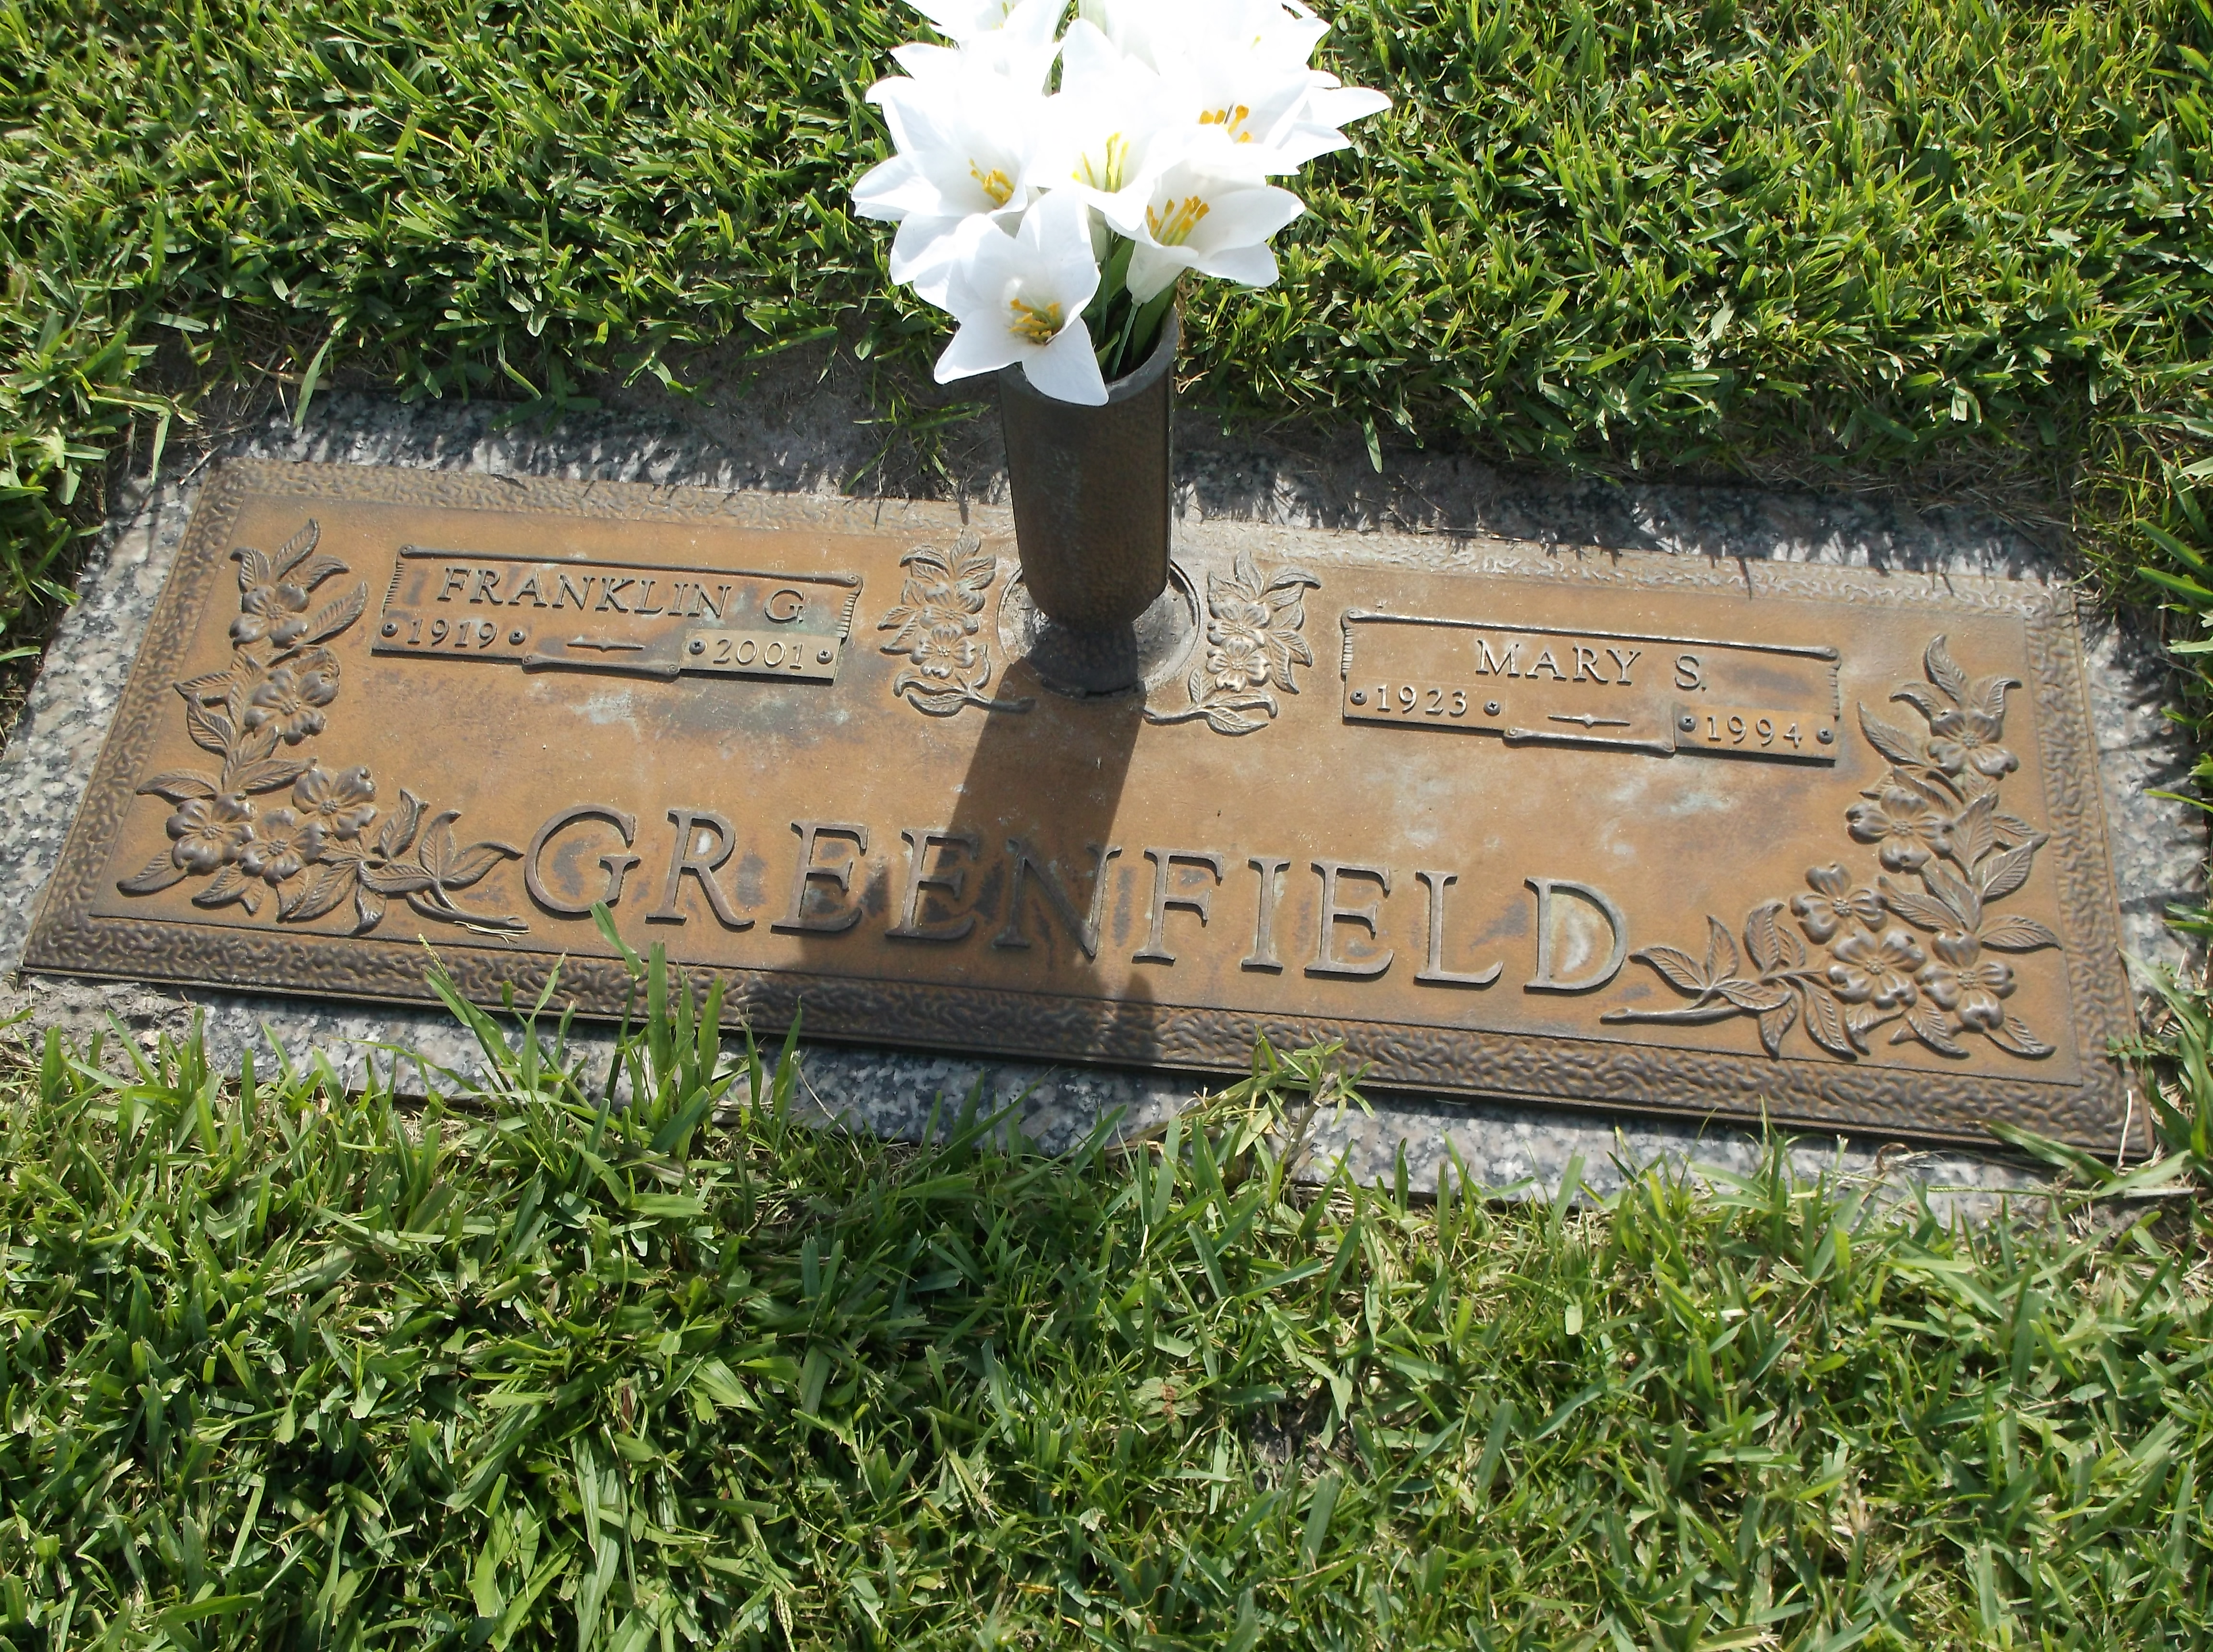 Mary S Greenfield